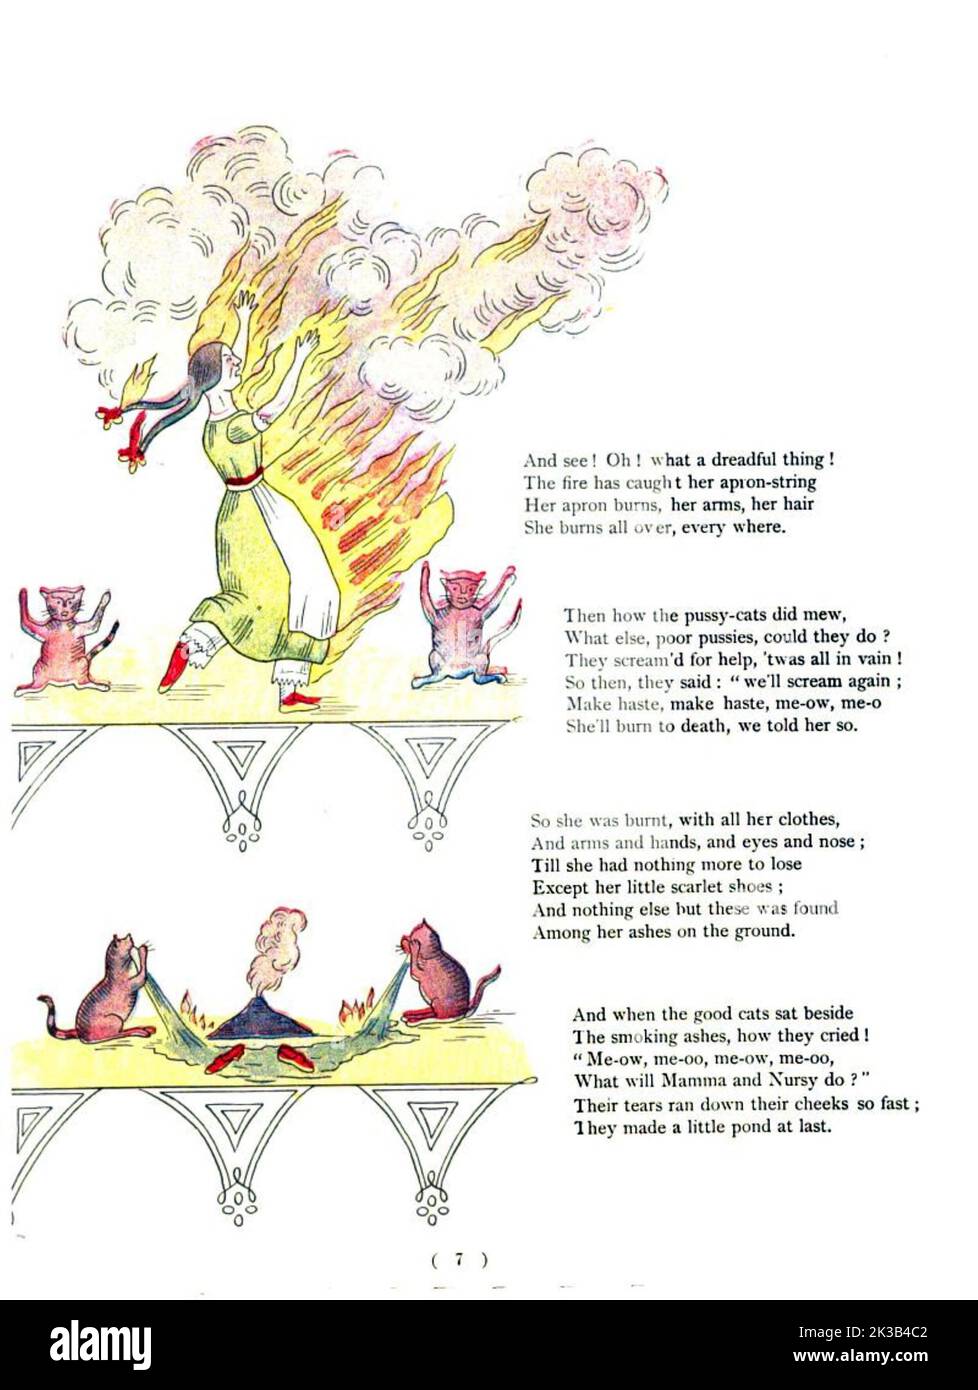 The Dreadful Story about Harriet and the Matches from ' The Struwwelpeter painting book ' Pretty Stories and Funny Pictures for Little Children by Heinrich Hoffmann Published in London in 1900 Stock Photo